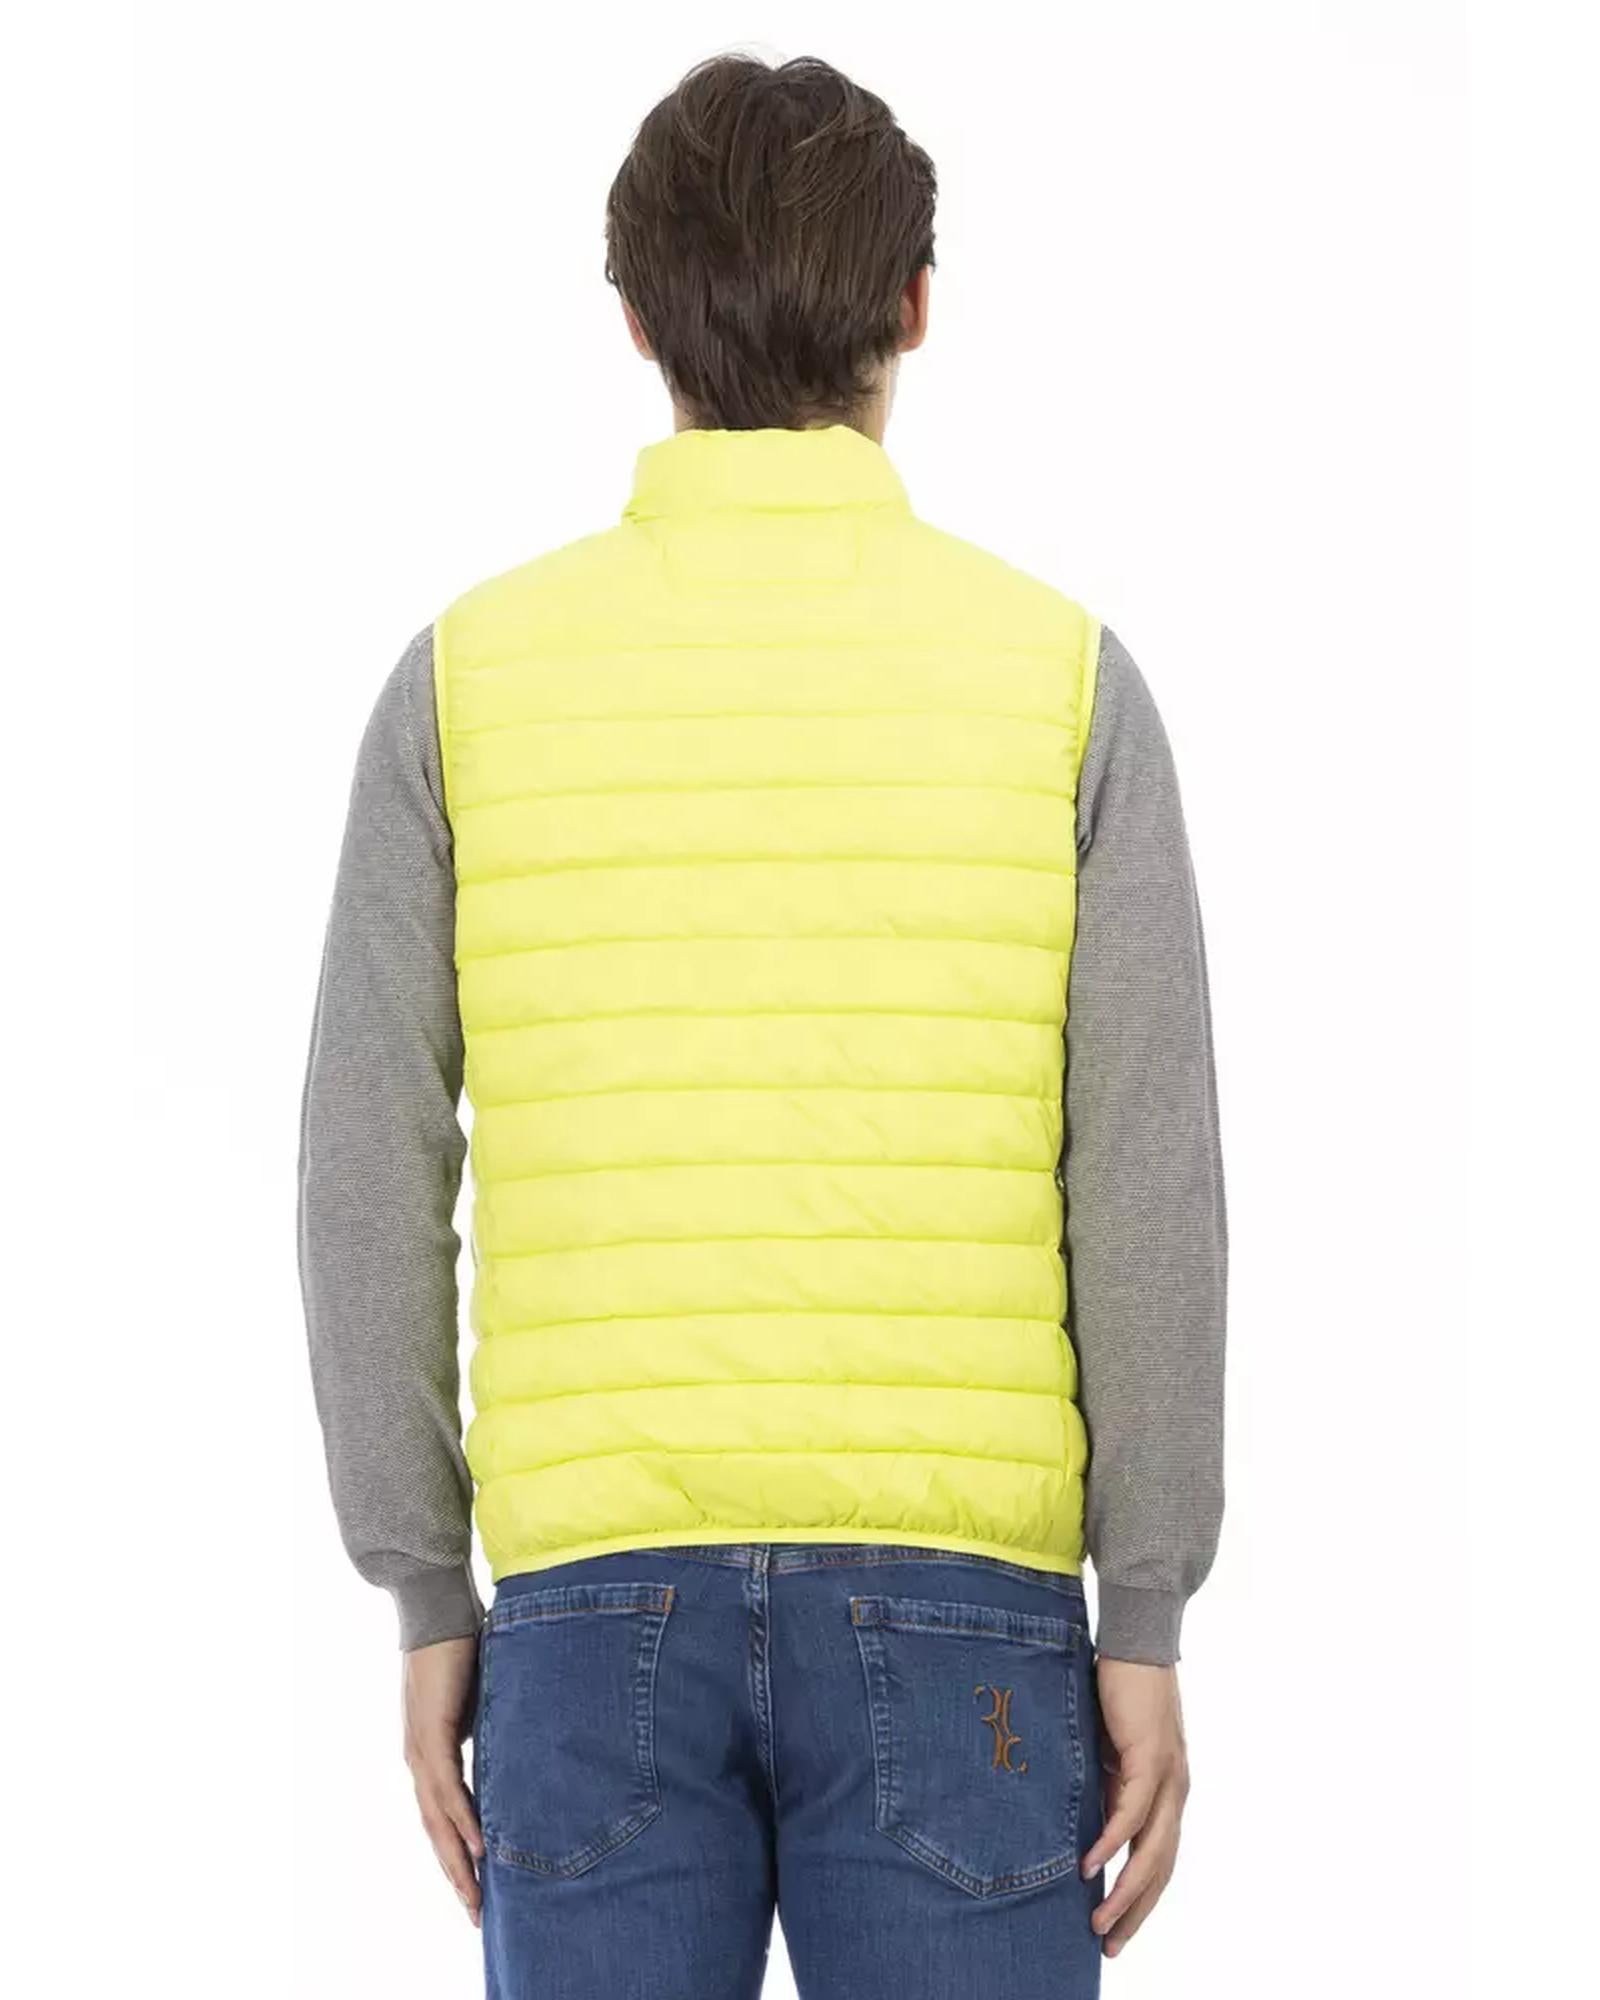 Sleeveless Down Jacket with Functional Pockets and Zipper Detailing M Men